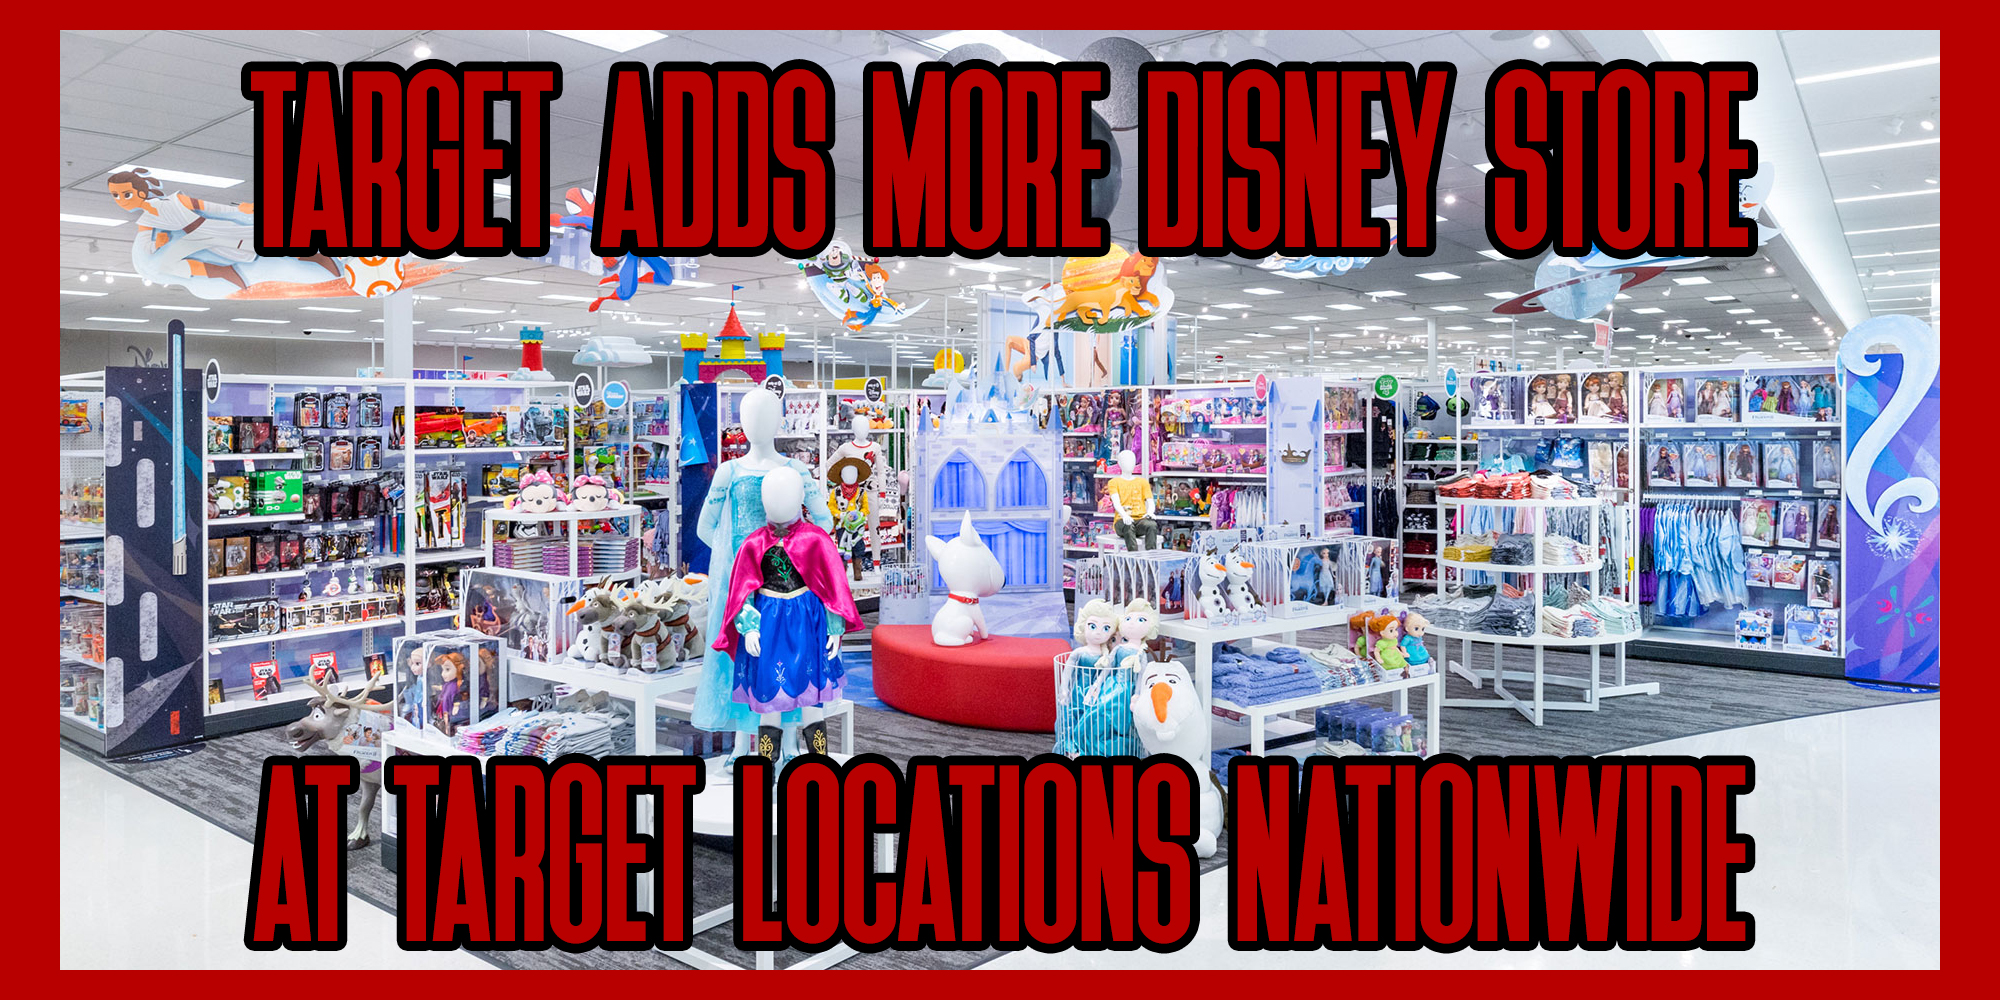 Target Adds More Disney Store at Target Locations Nationwide